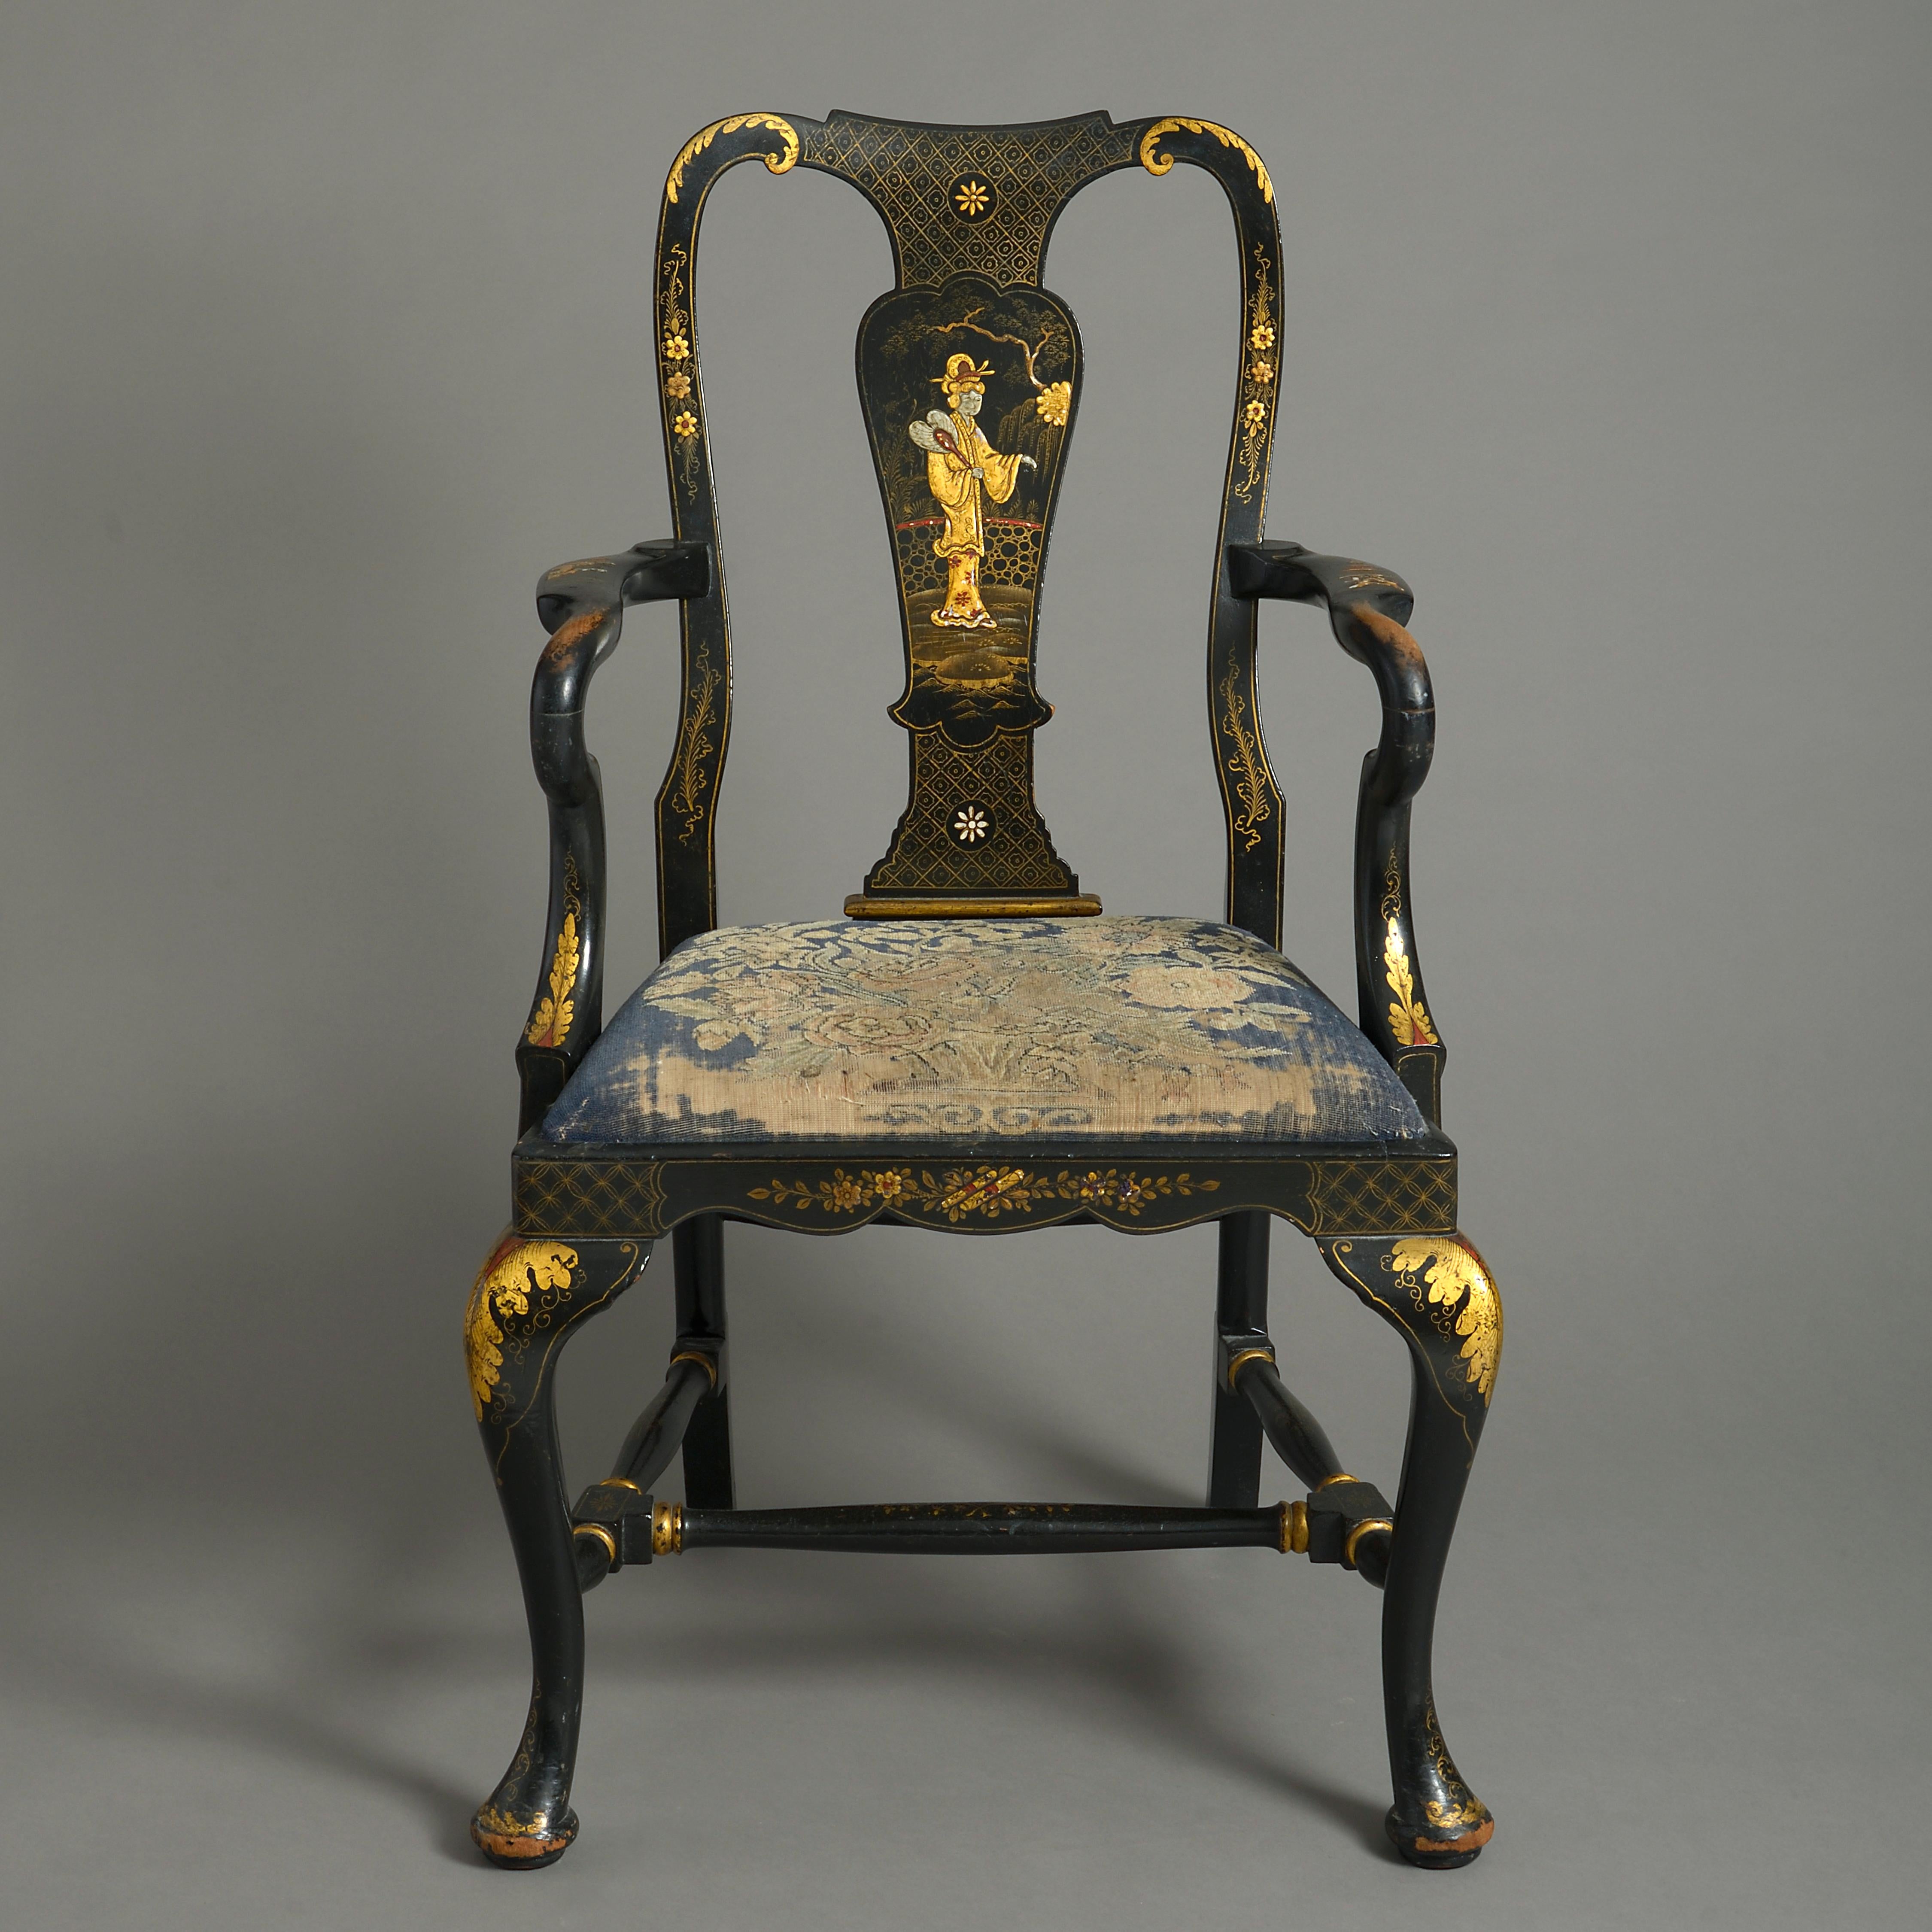 A late 19th century black japanned and gilded open armchair in the Queen Anne manner, having a shaped splat back, decorated throughout with chinoiserie, an upholstered seat and all raised upon cabriole legs terminating in pad feet.